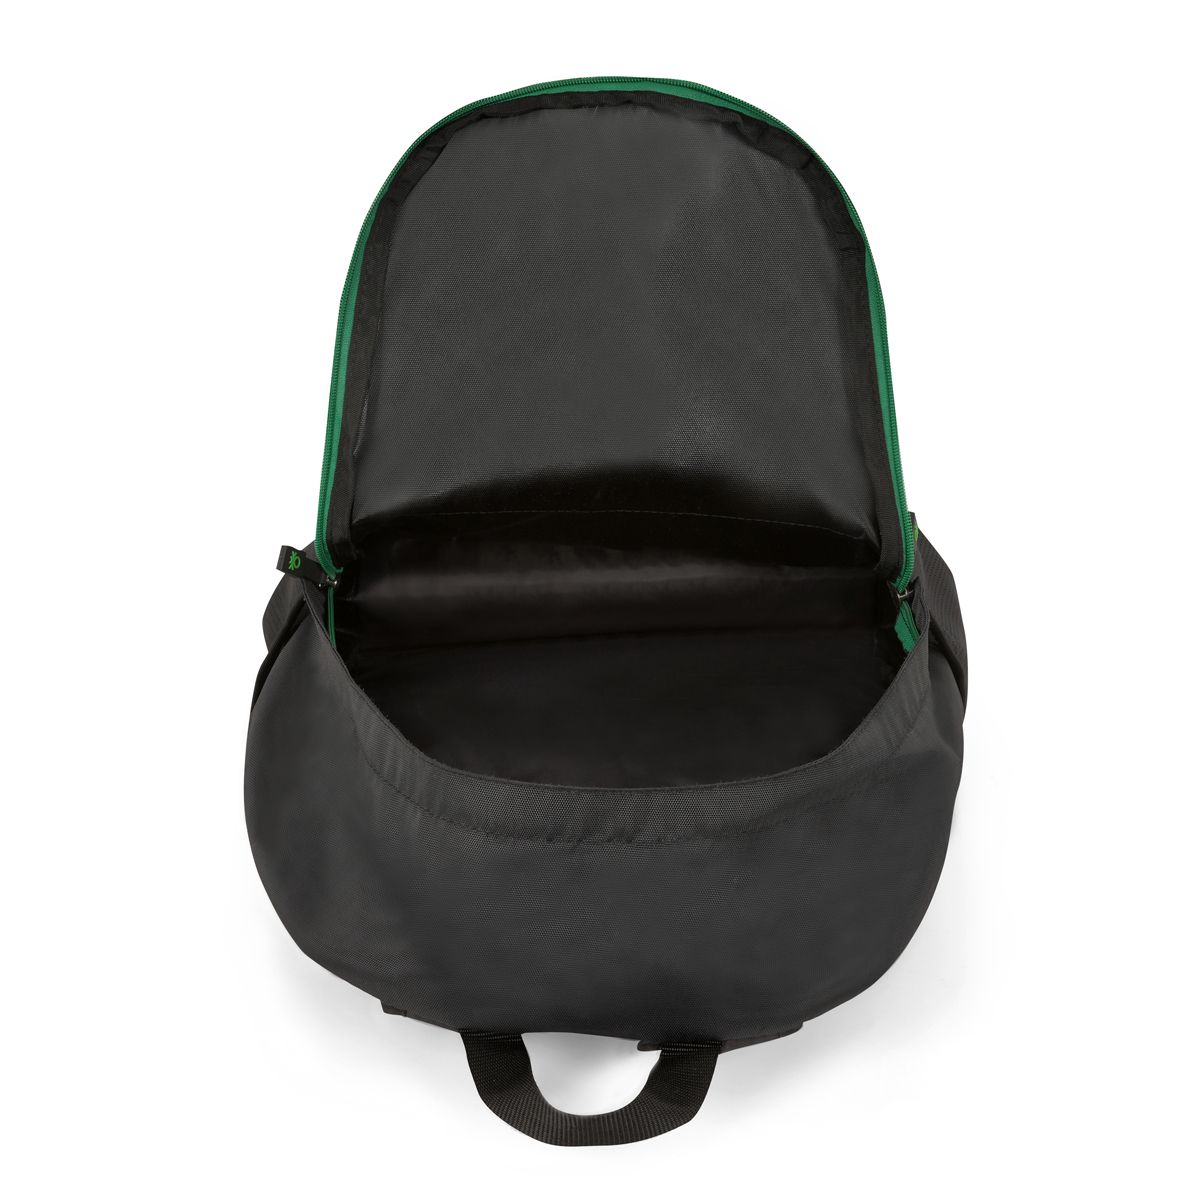 United Colors of Benetton Willow Laptop Backpack Black